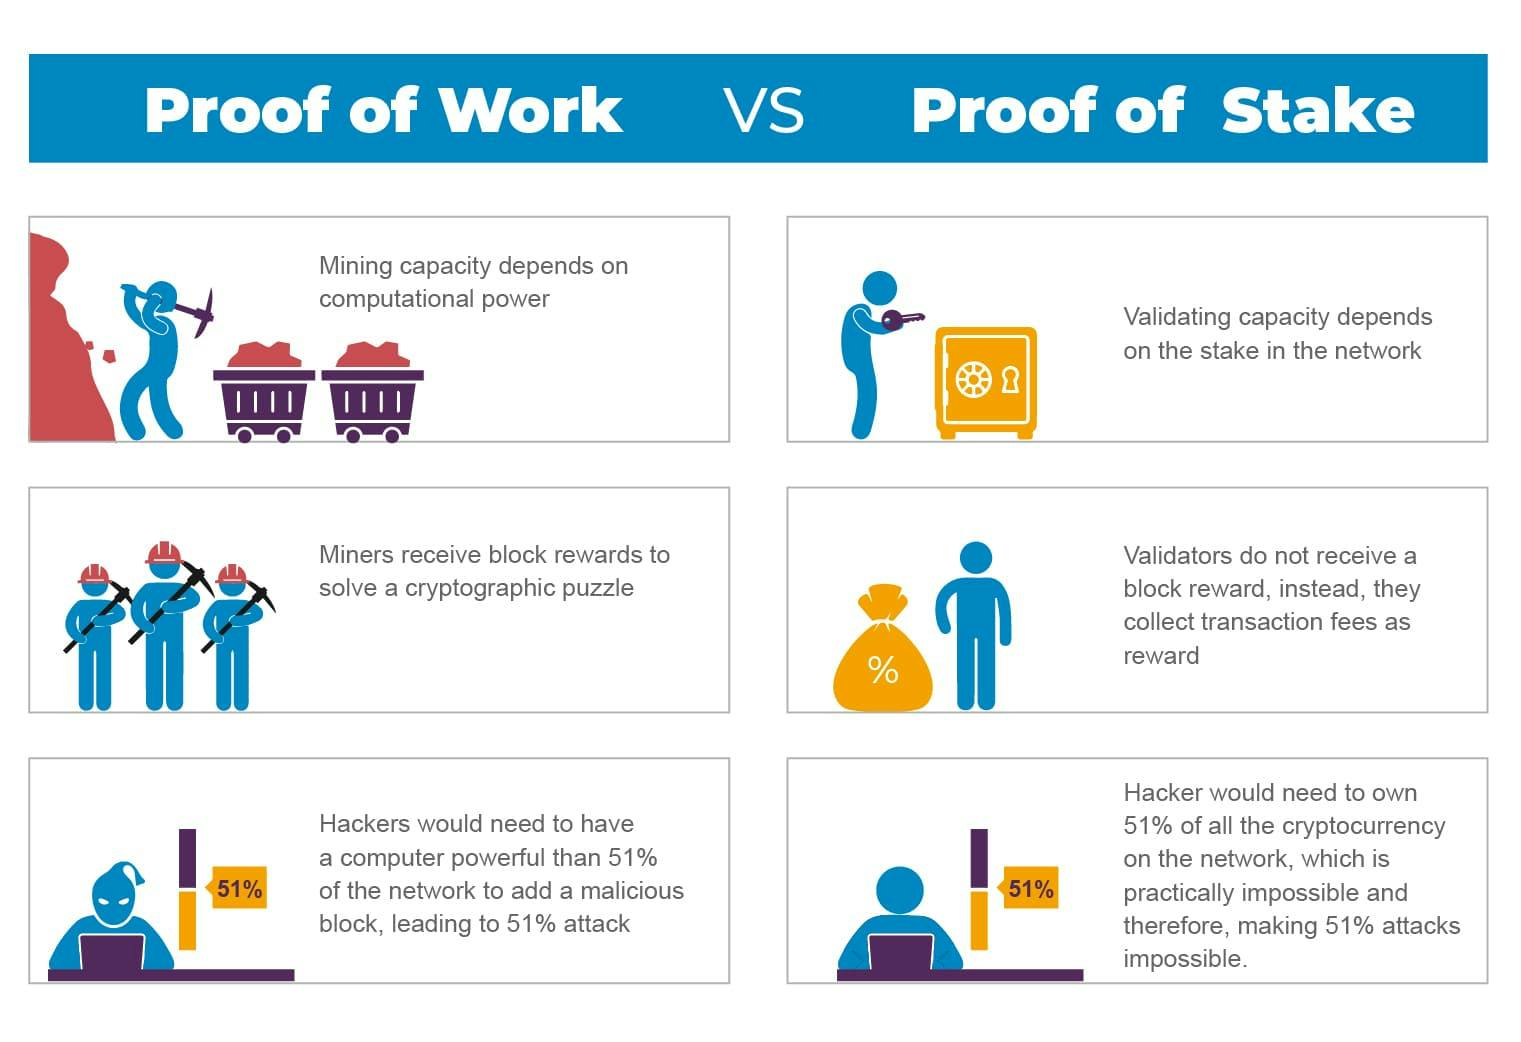 Proof of Work vs Proof of Stake Sourcehttps://www.leewayhertz.com/proof-of-work-vs-proof-of-stake/